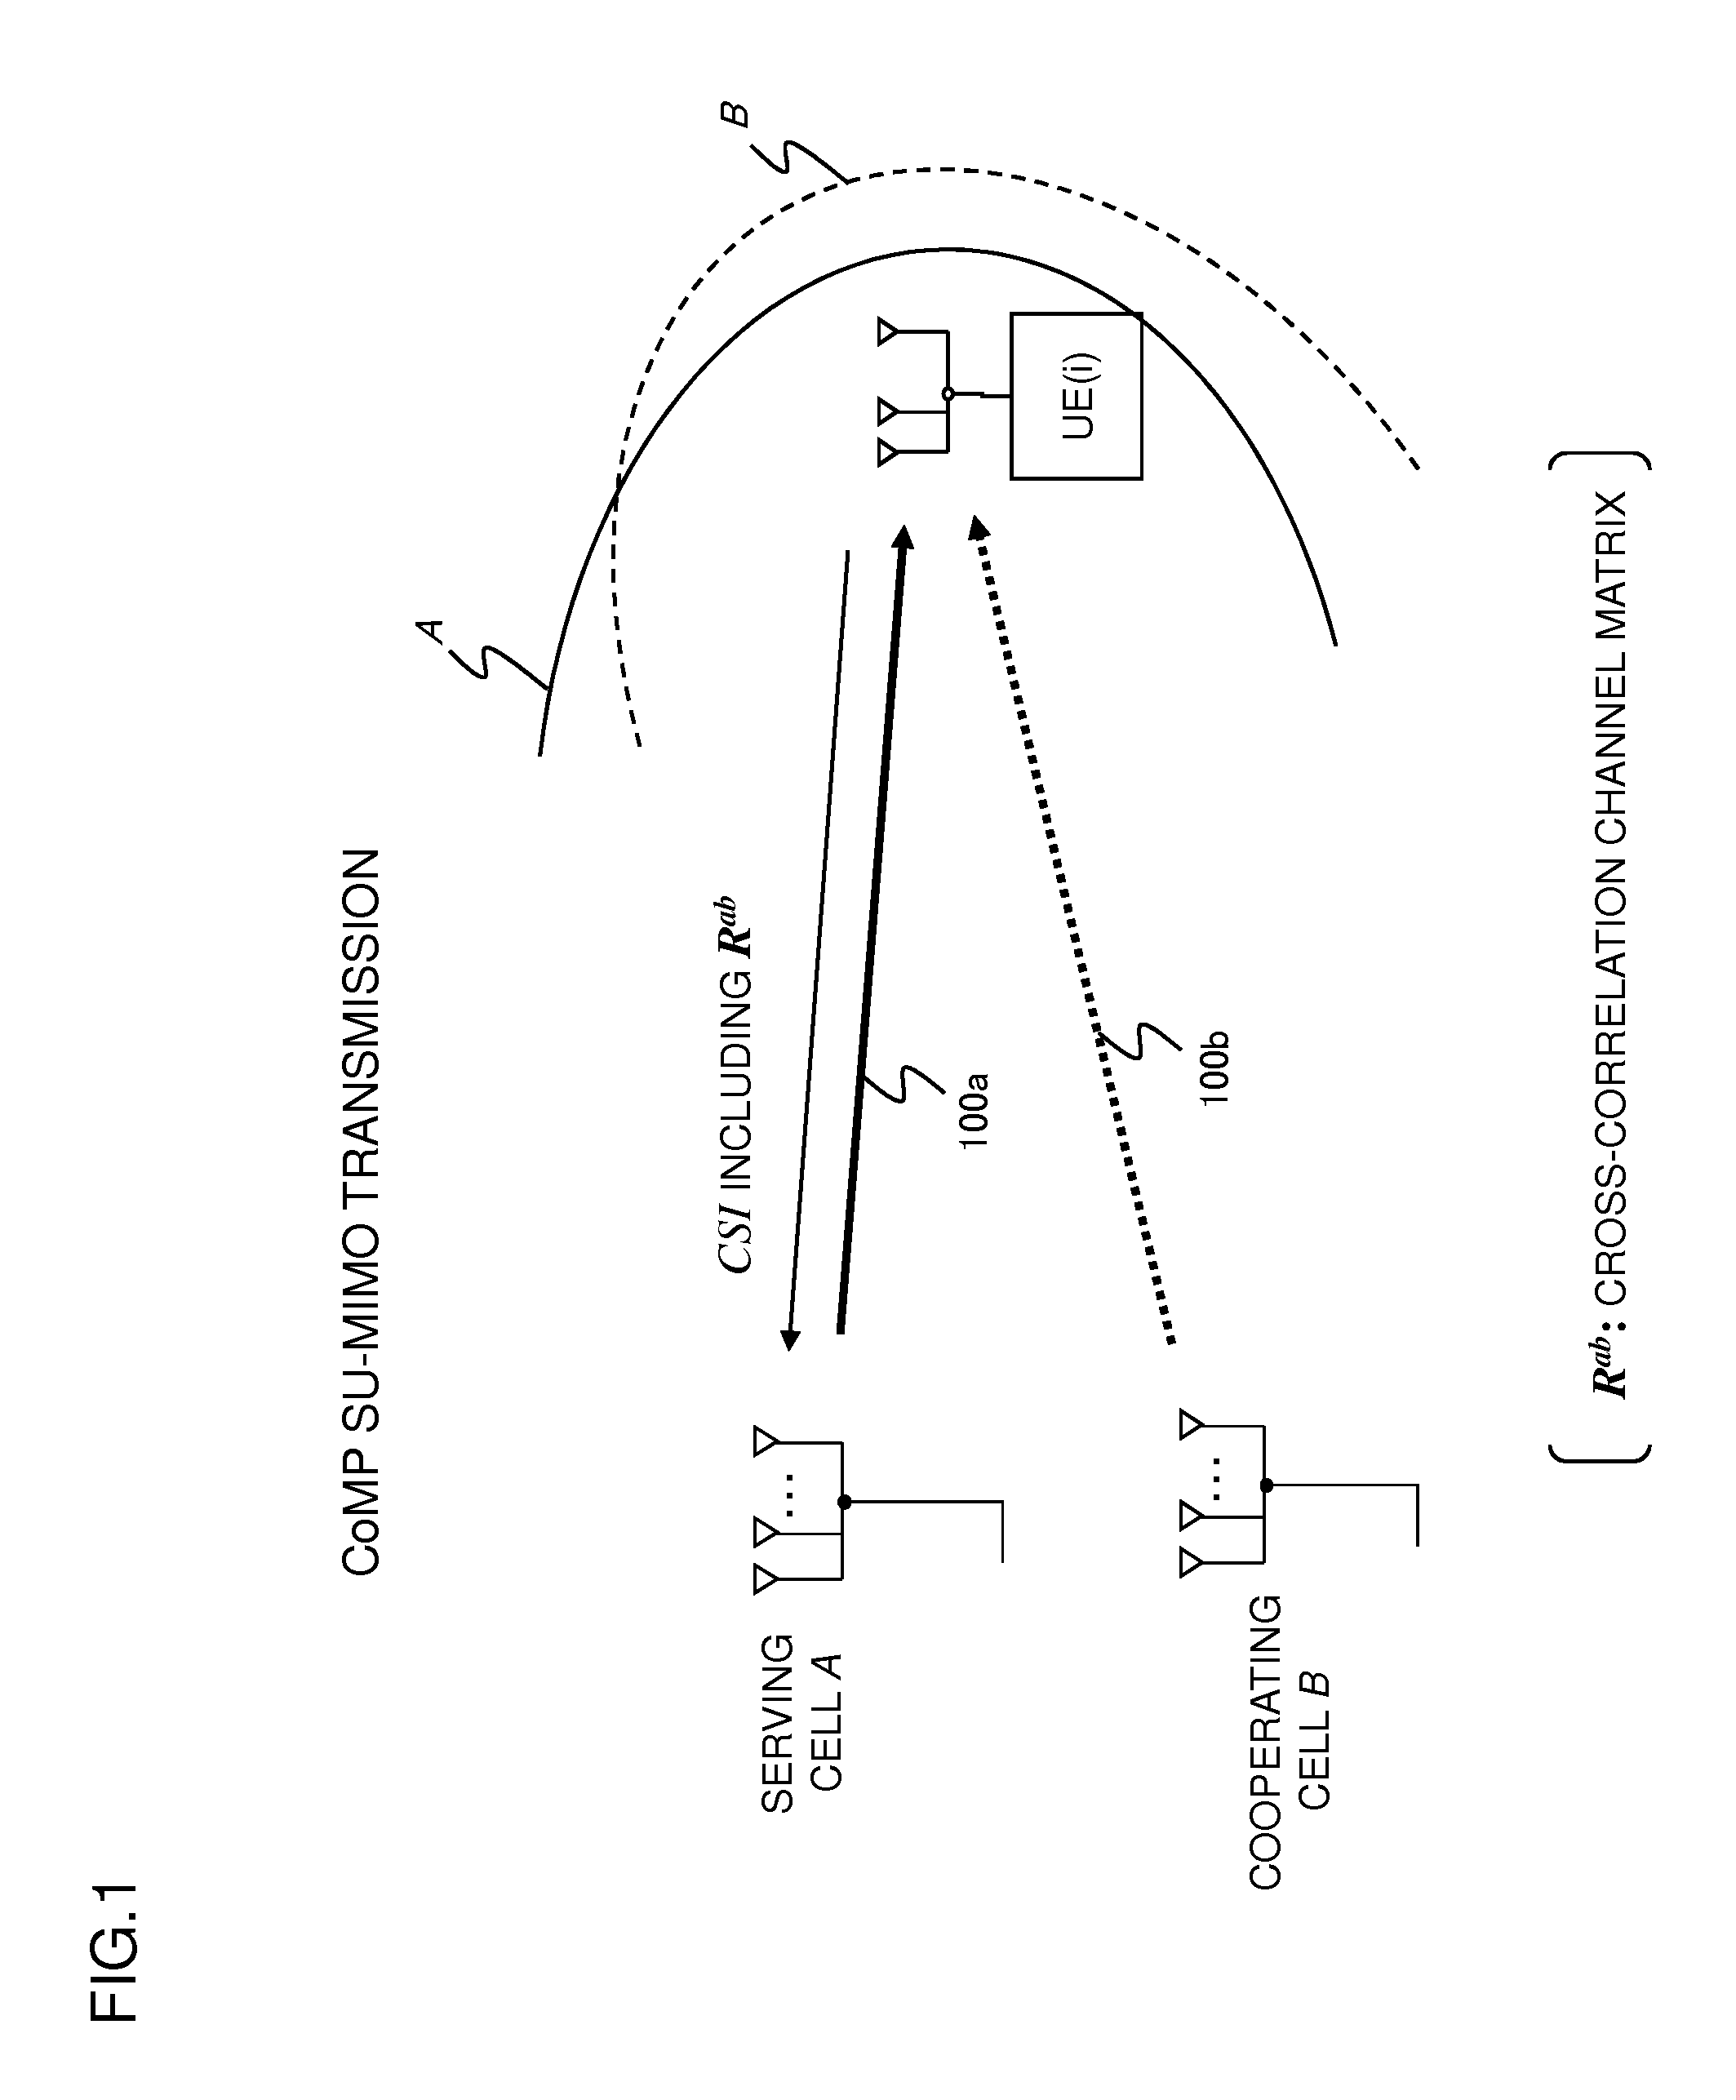 Precoding techniques for downlink coordinated multipoint transmission in radio communications system